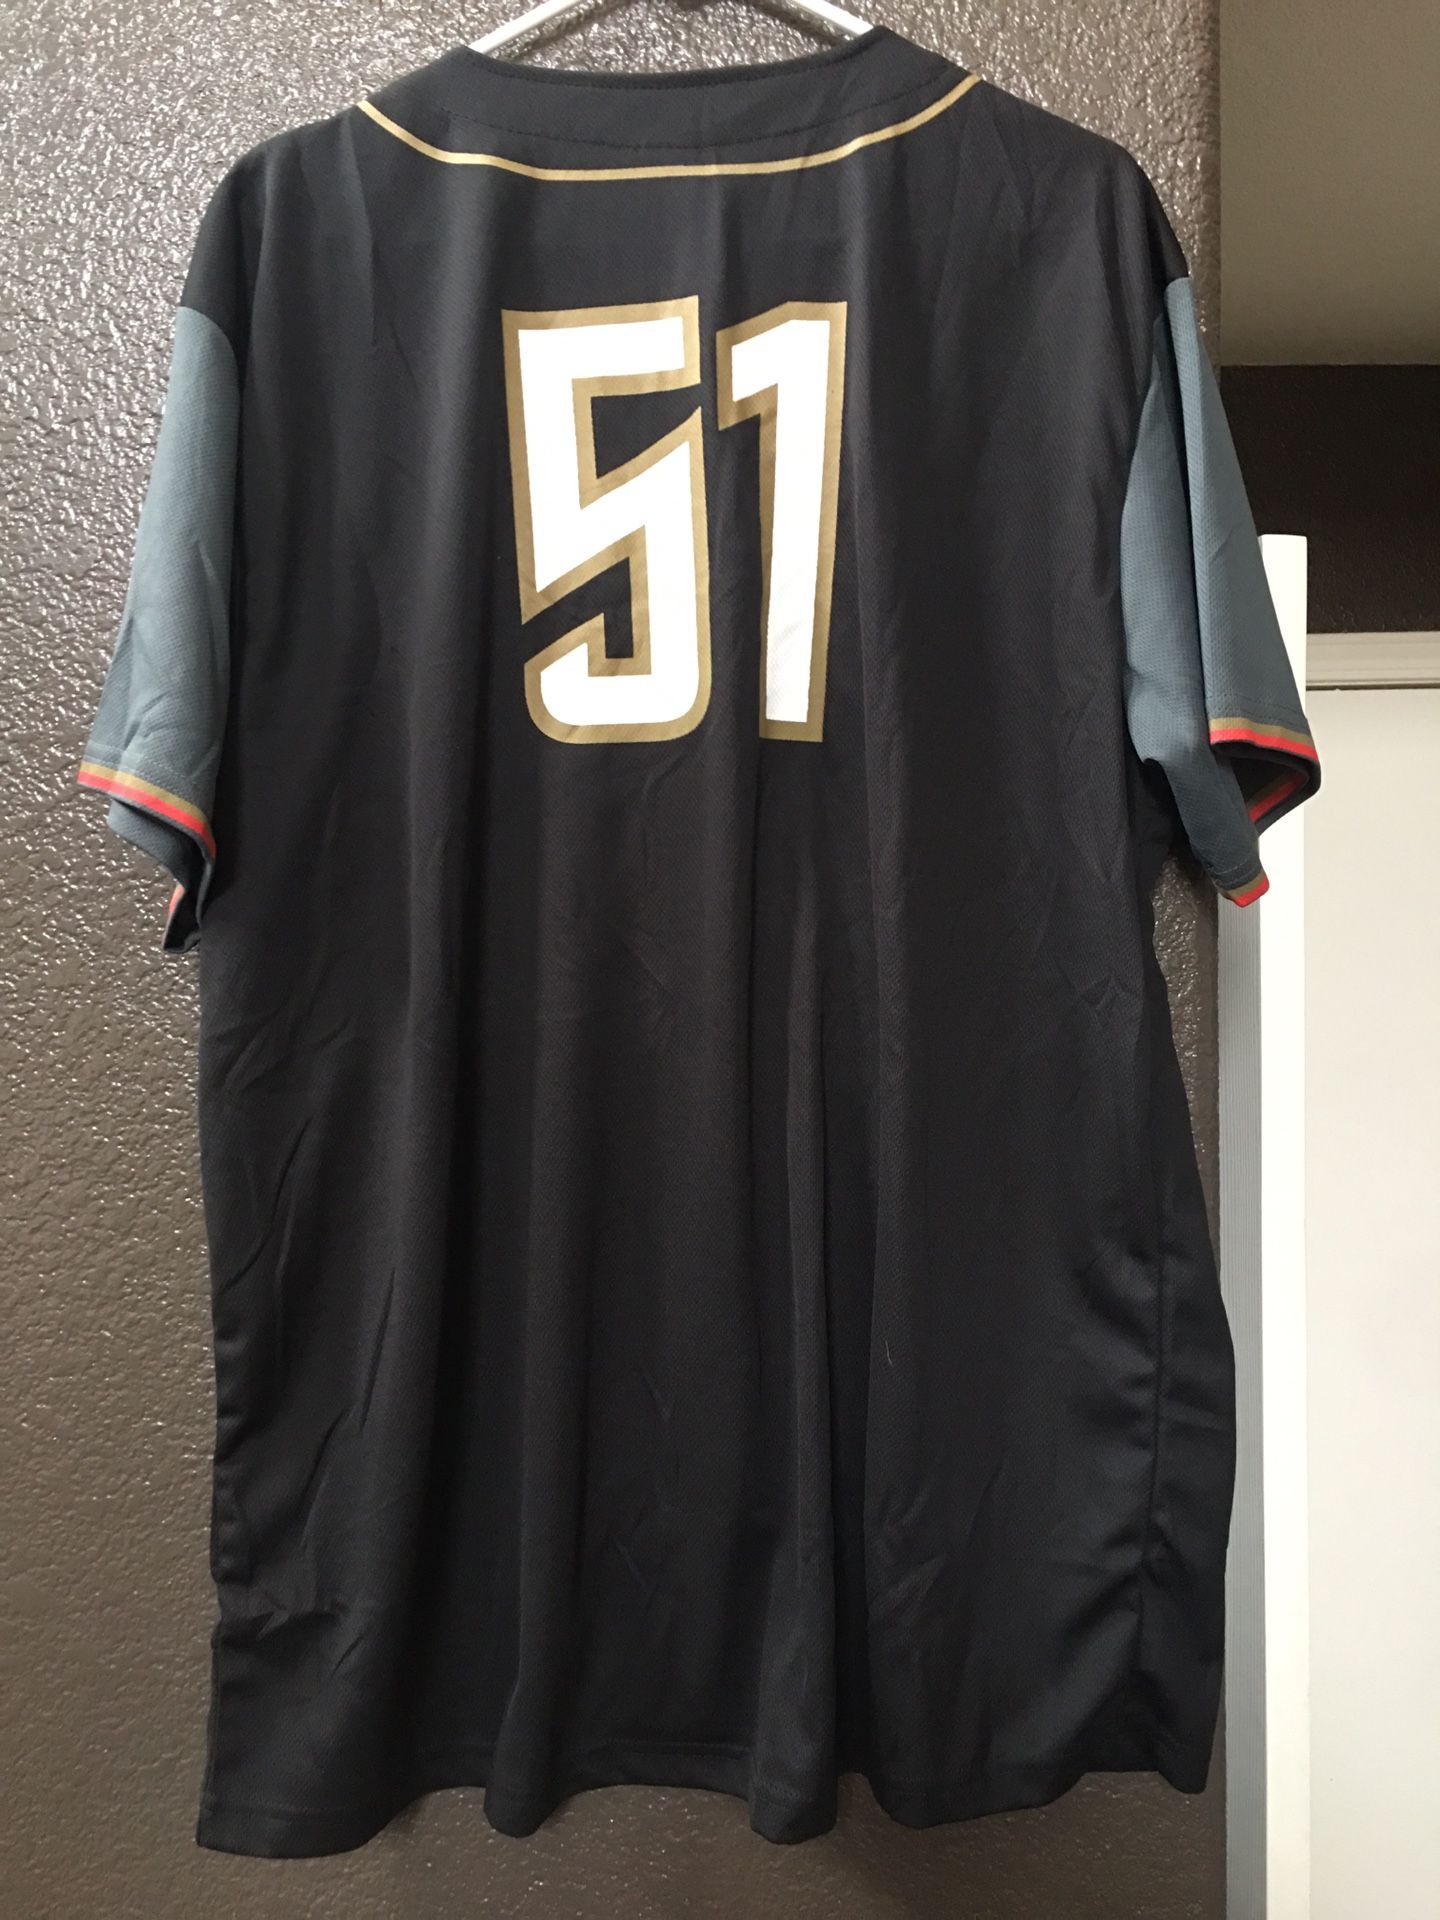 Golden Knights Jersey for Sale in Las Vegas, NV - OfferUp